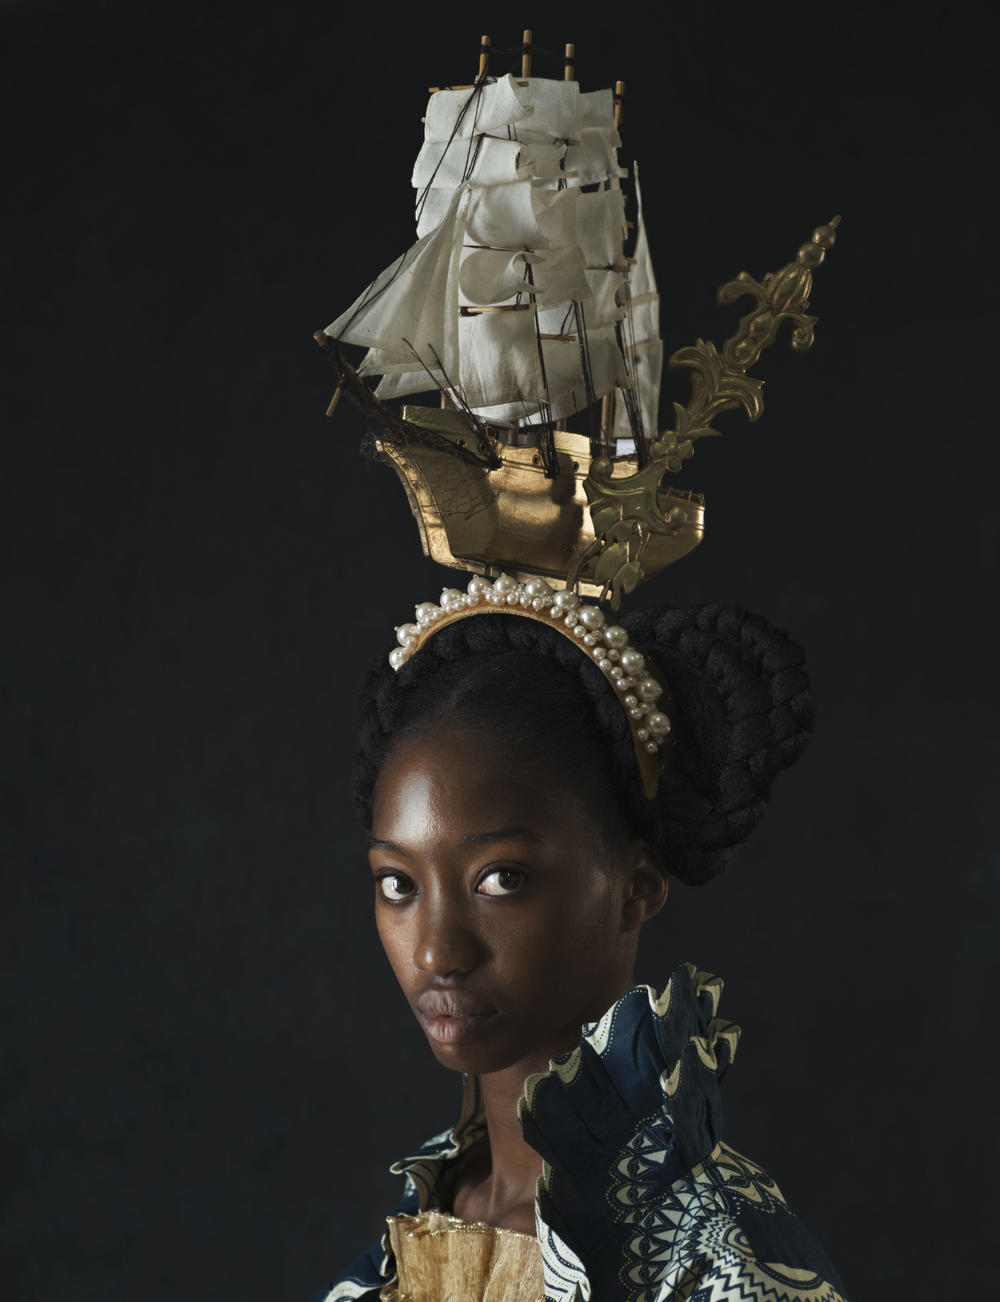 <em>Vessel. </em>This headdress was inspired by the children's book 